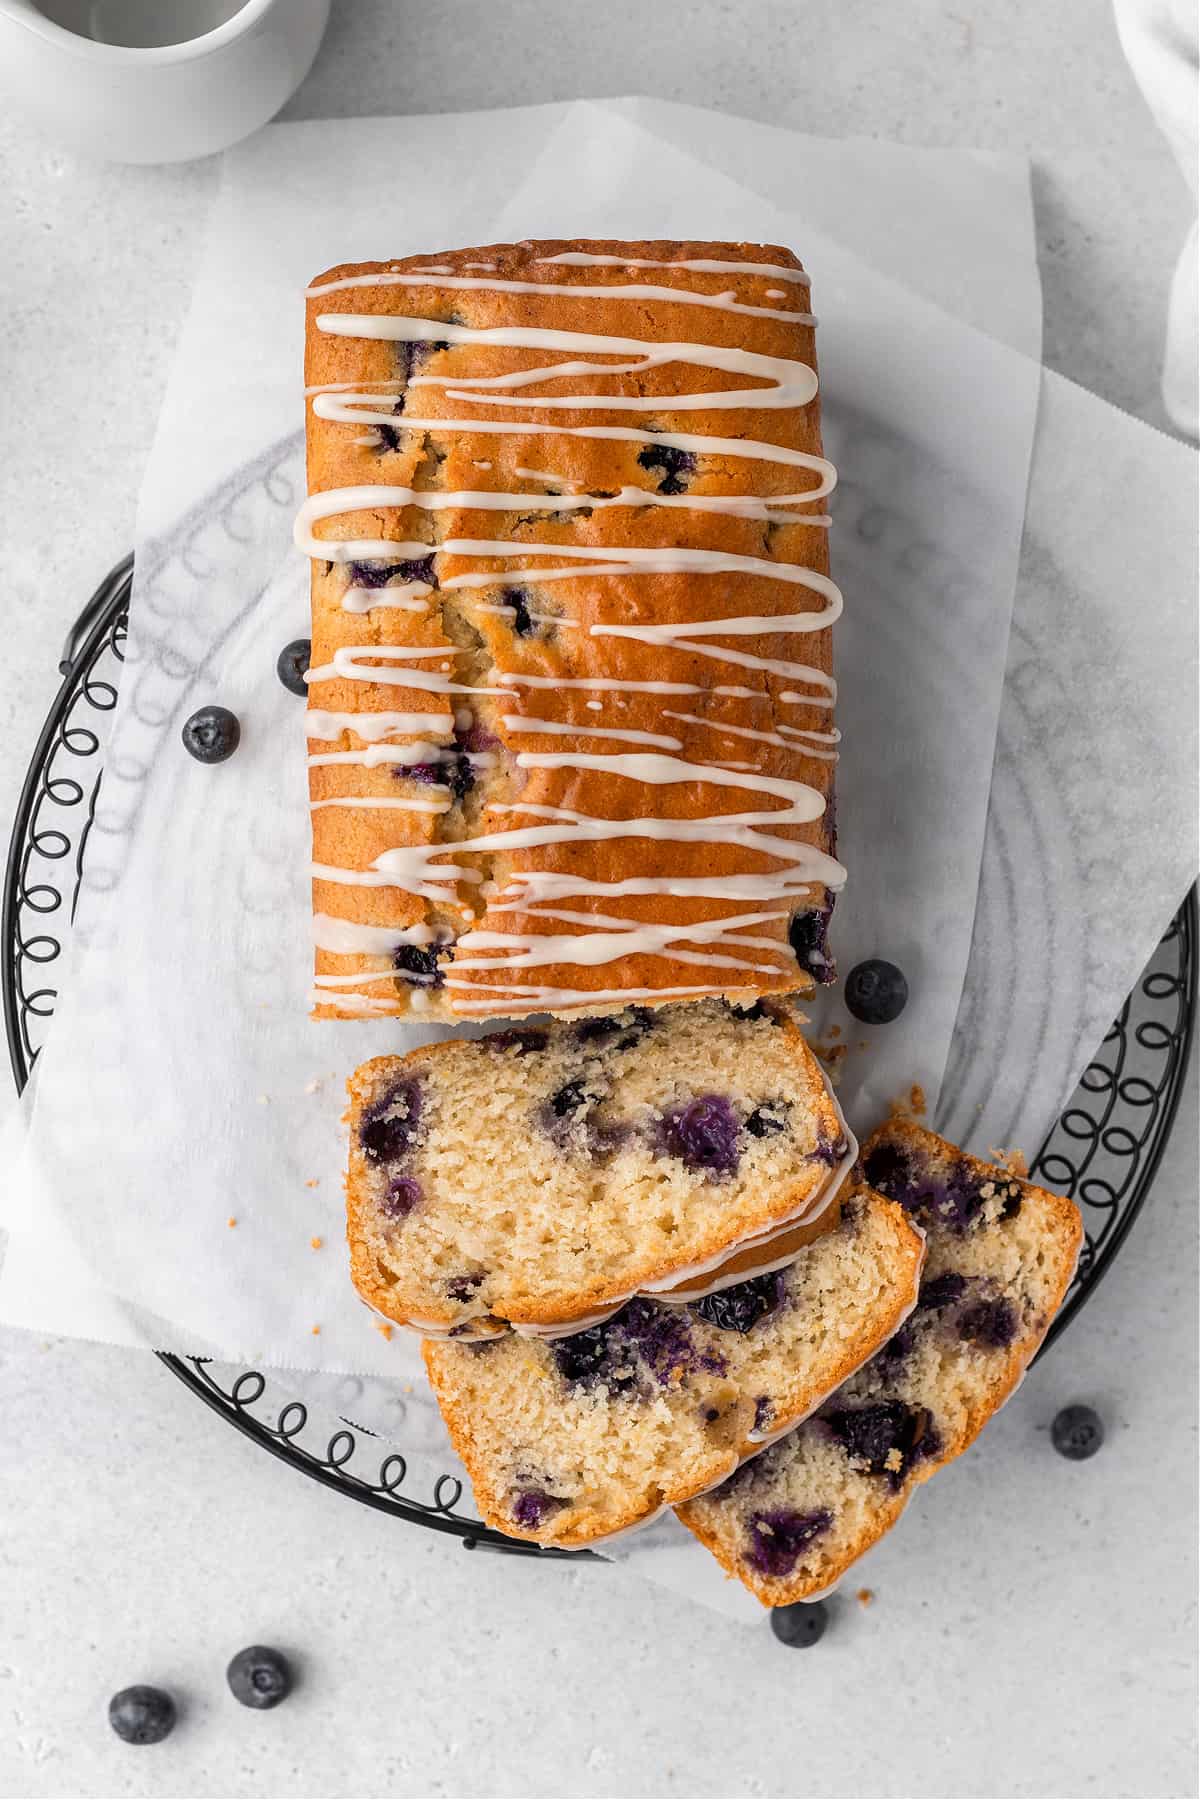 Overhead view of partially sliced lemon blueberry bread on a cooling rack.